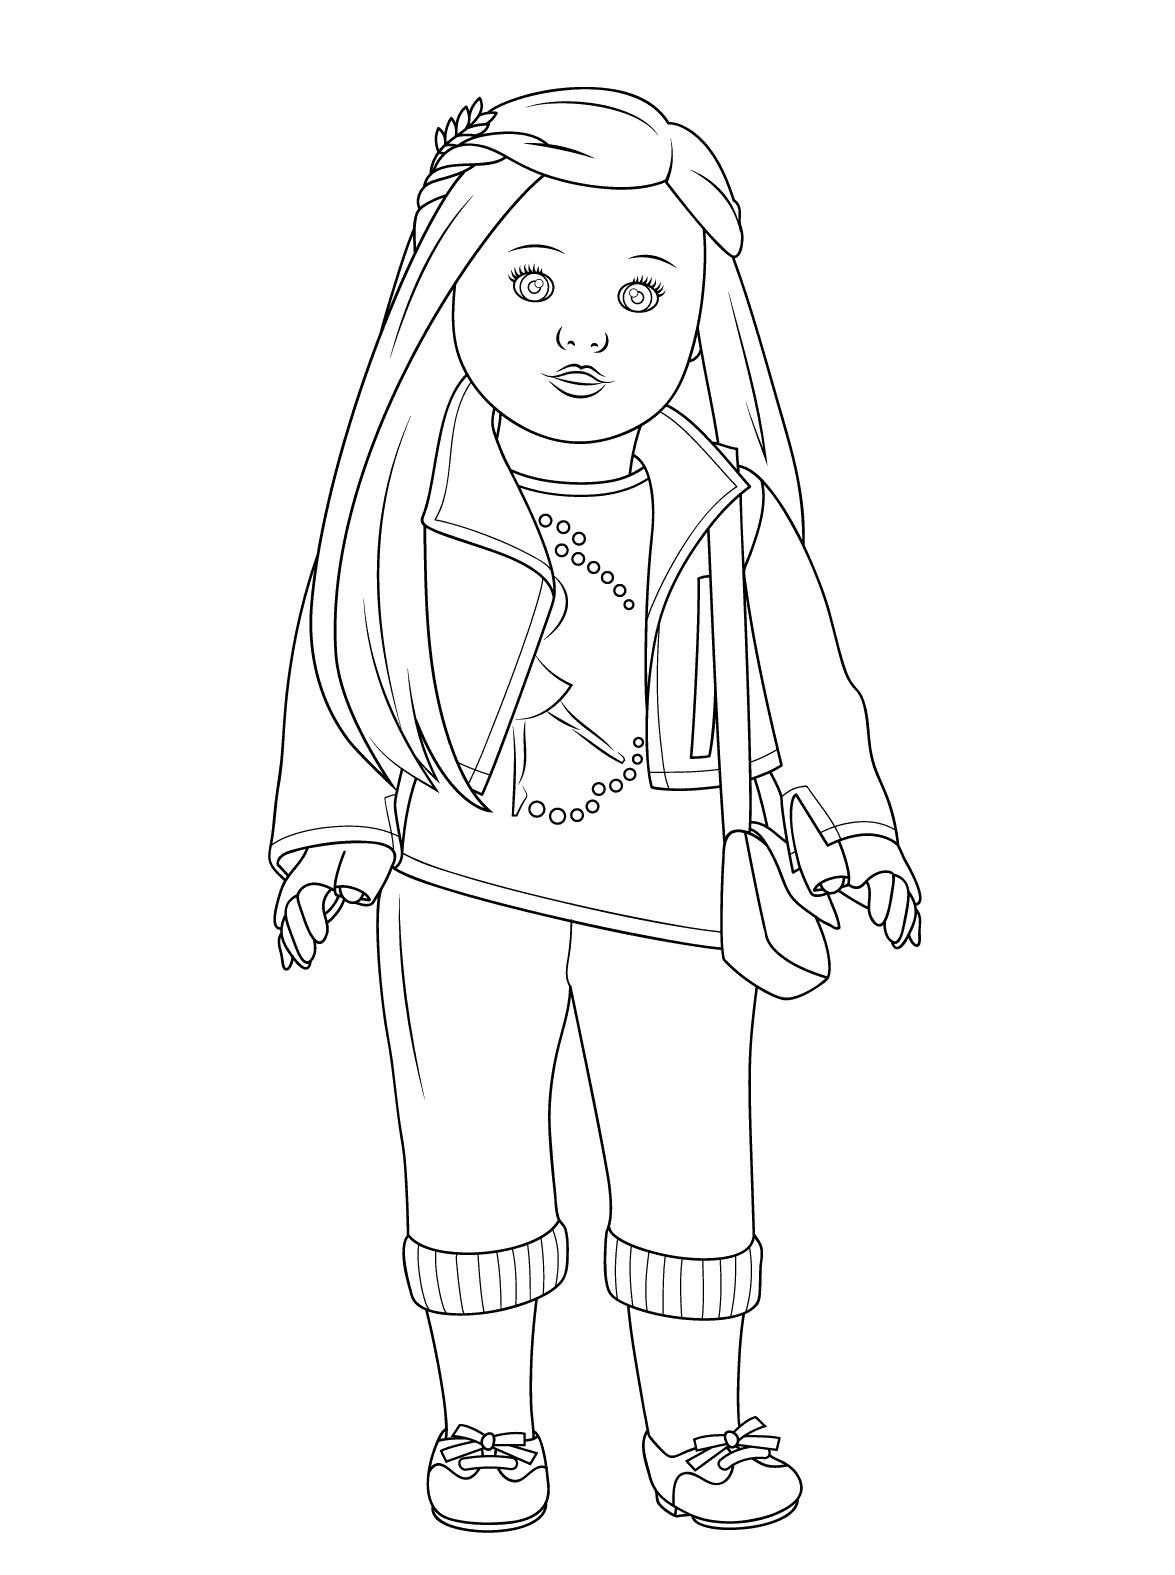 Cute American Girl Doll Coloring Pages Pdf to Print - American Girl Doll Printables Coloring Pages